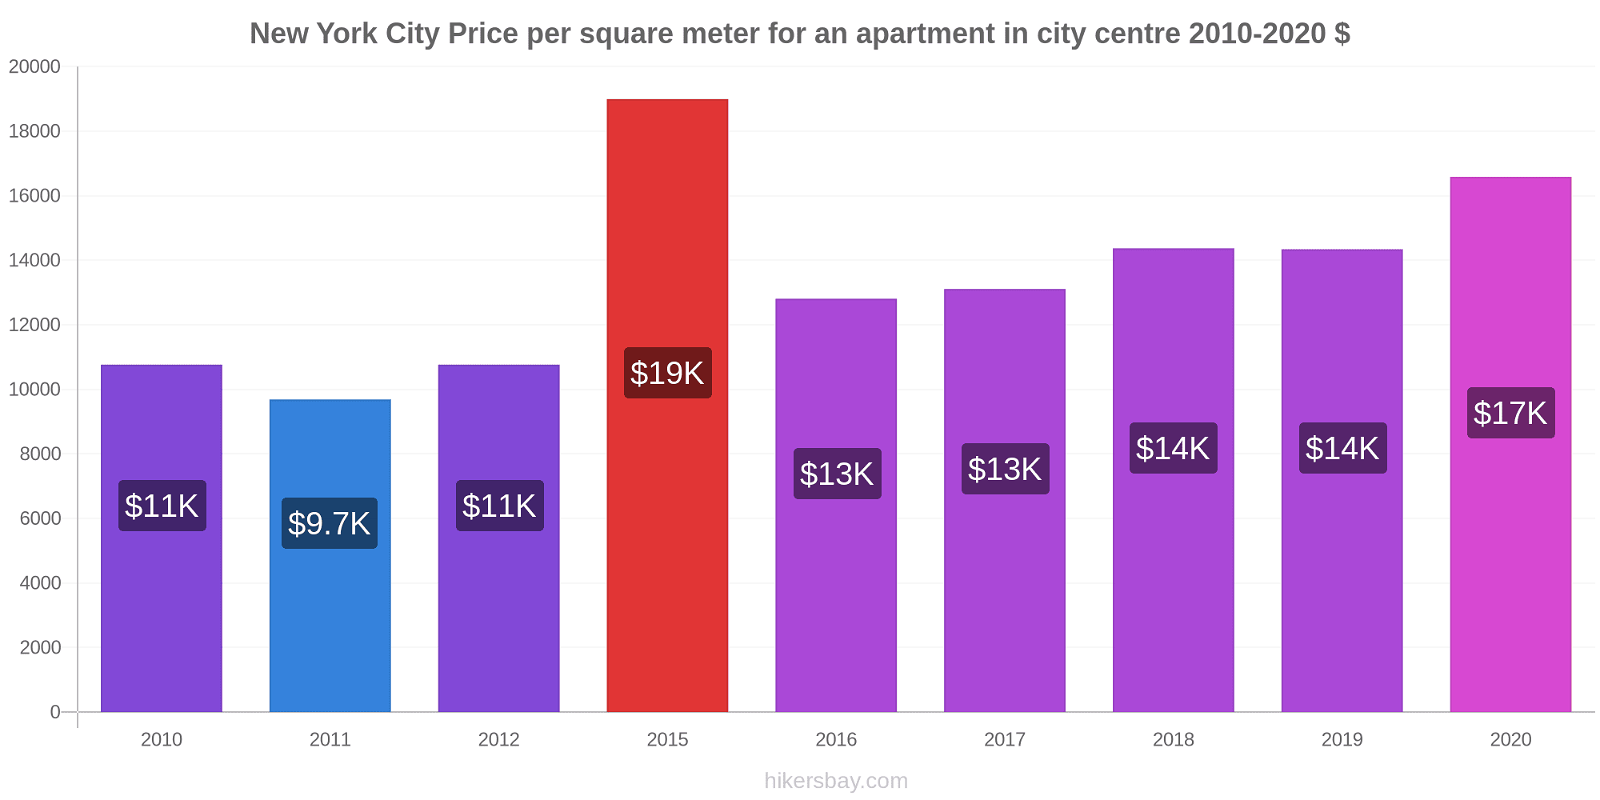 New York City price changes Price per square meter for an apartment in city centre hikersbay.com